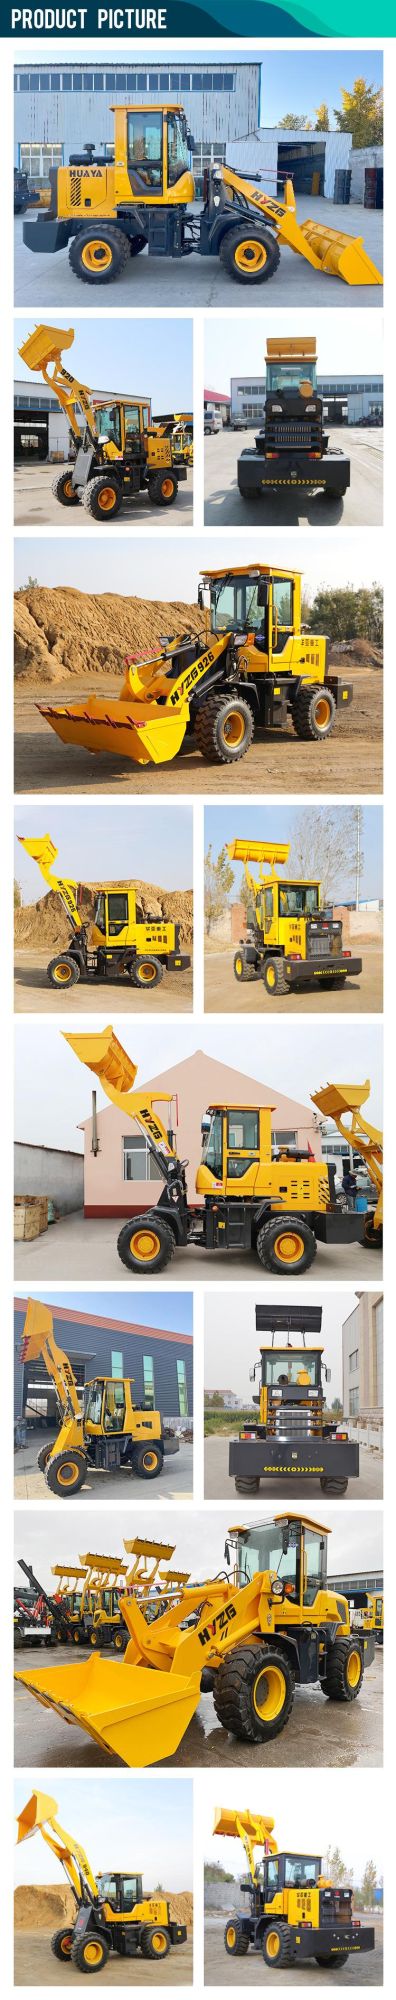 Huaya Brand Construction Machinery High Quality Diesel Engine Articulated Wheel Loader 4WD China Heavy Bucket Shovel Wheel Front End Loaders for Sales